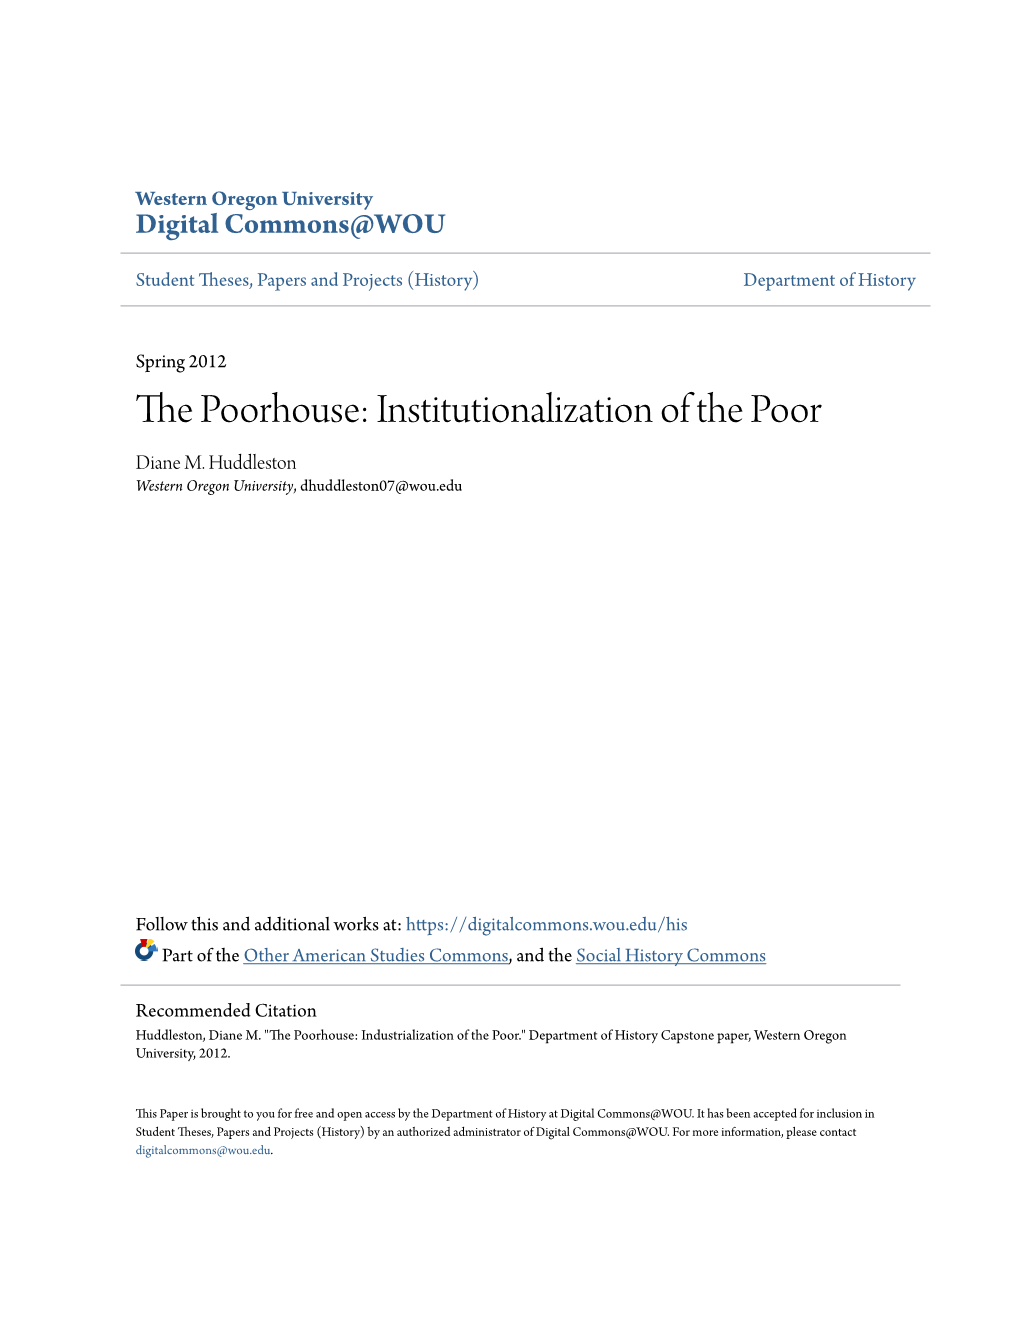 The Poorhouse: Institutionalization of the Poor